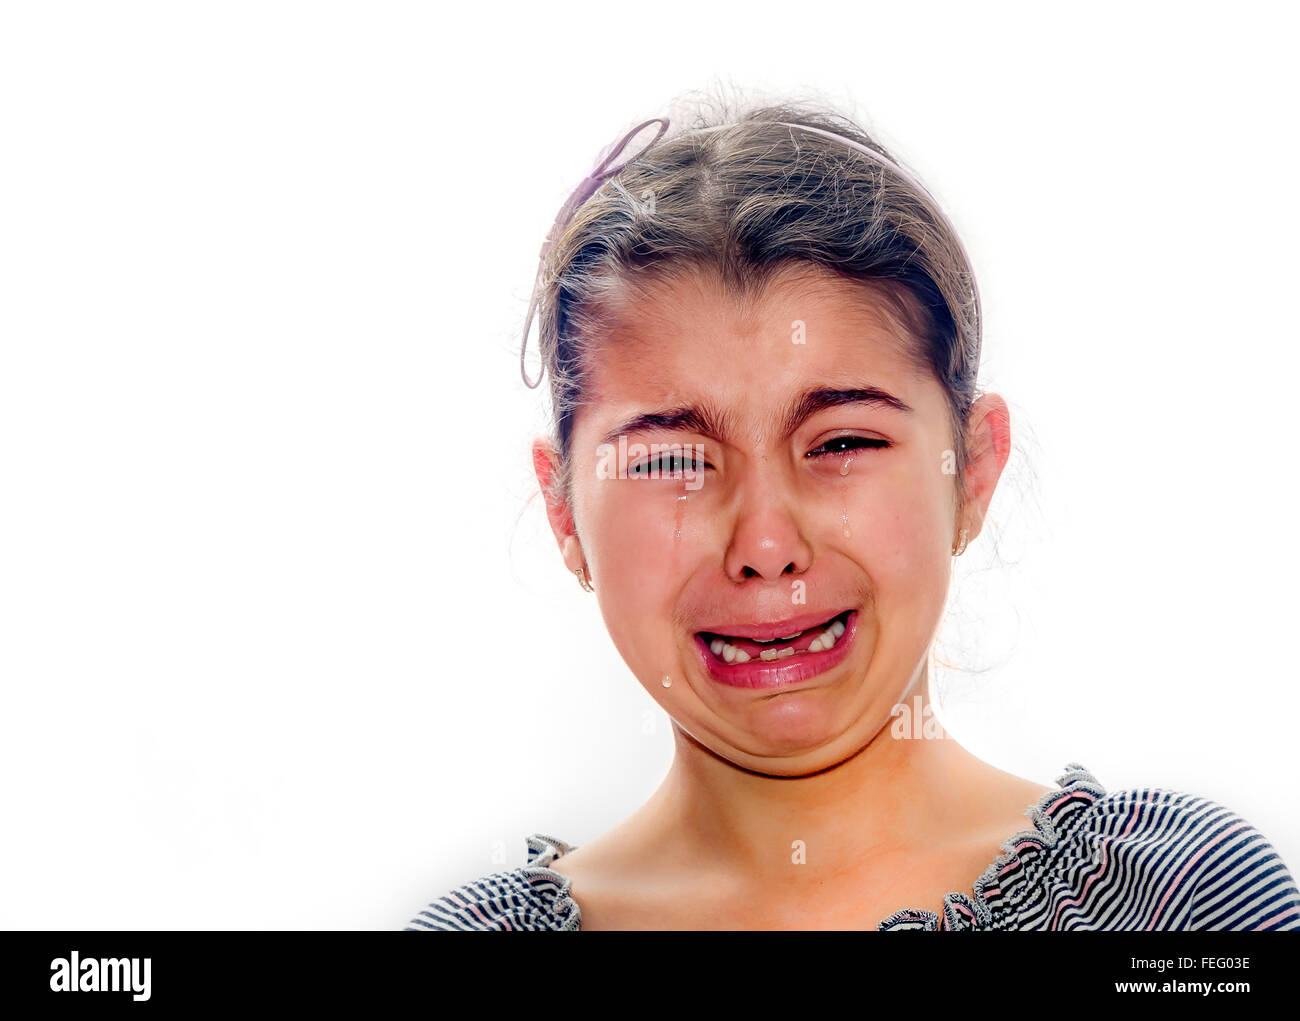 Little girl crying with tears rolling down her cheeks isolated on white Stock Photo